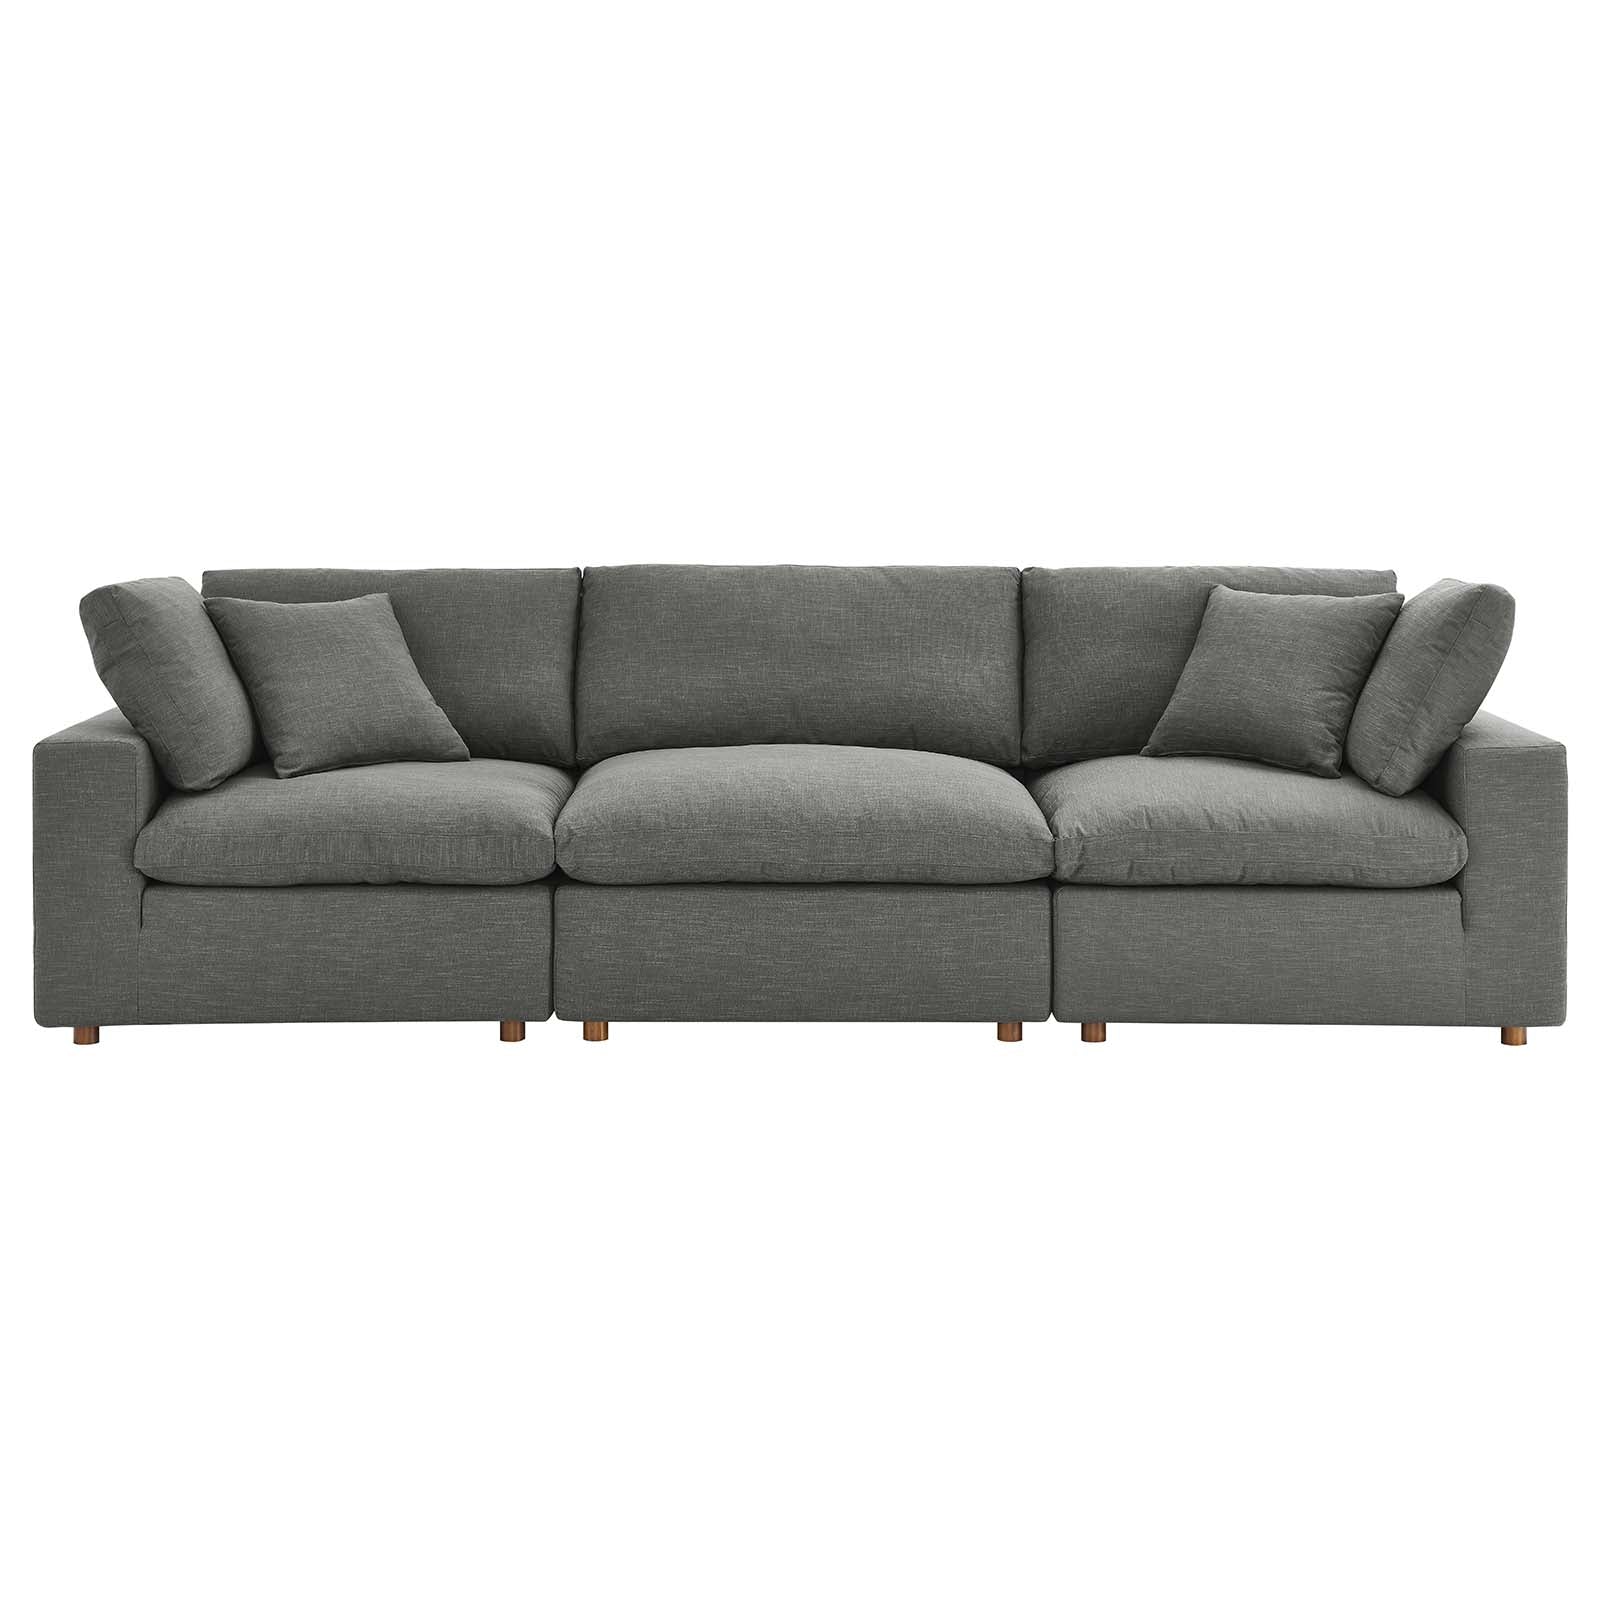 Modway Living Room Sets - Commix Down Filled Overstuffed 3 Piece Sectional Sofa Set Gray